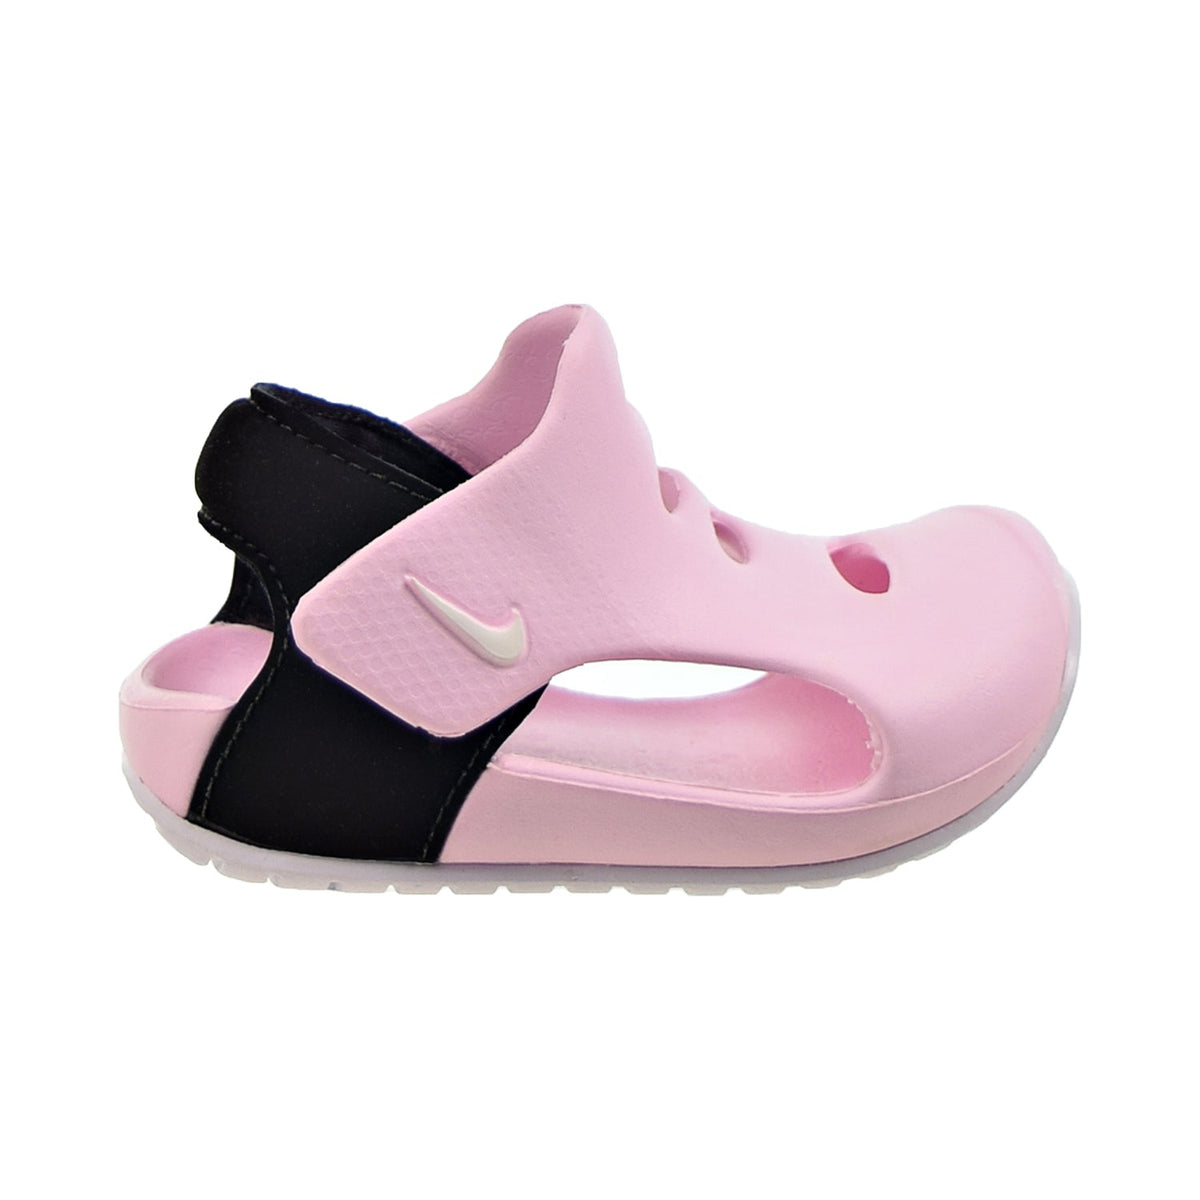 Nike Sunray Protect (TD) Toddler's Sandals Pink Sports Plaza NY